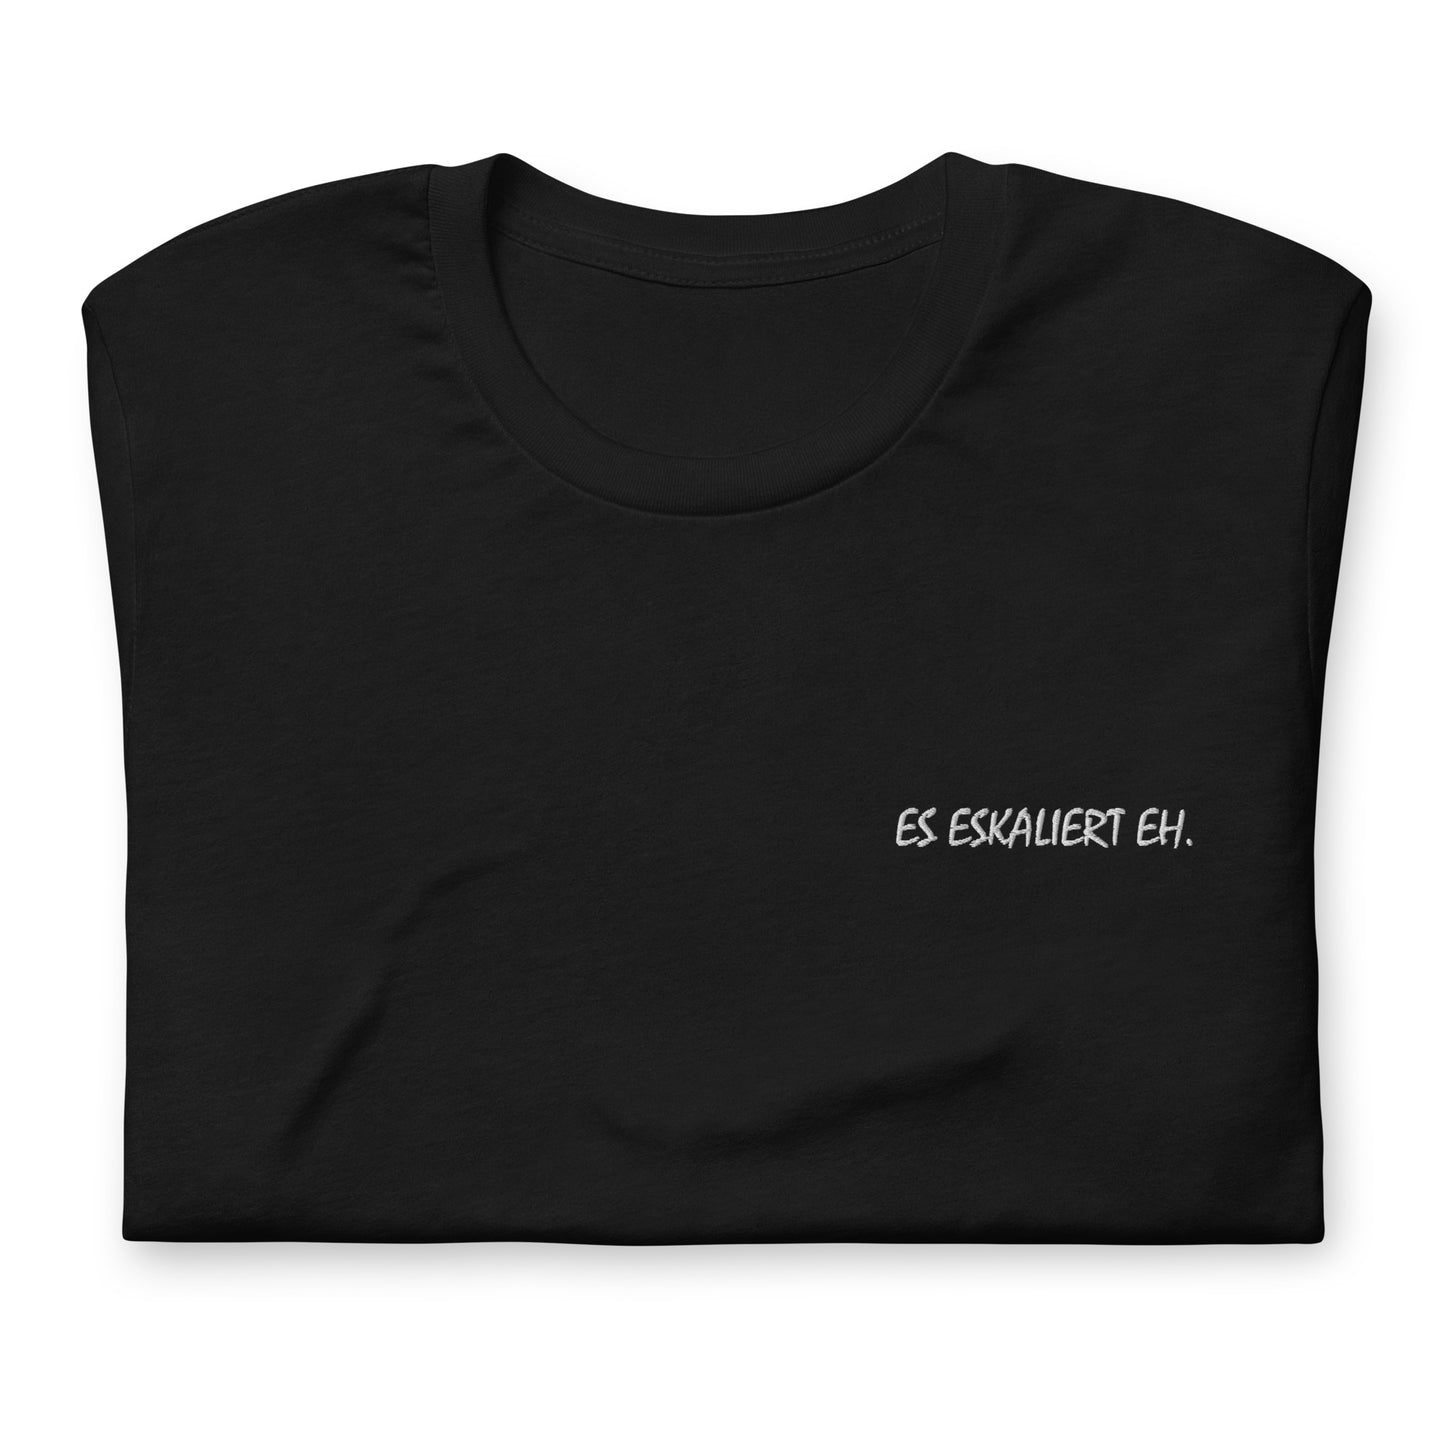 IT'S ESCALATED EH. - embroidered T-shirt